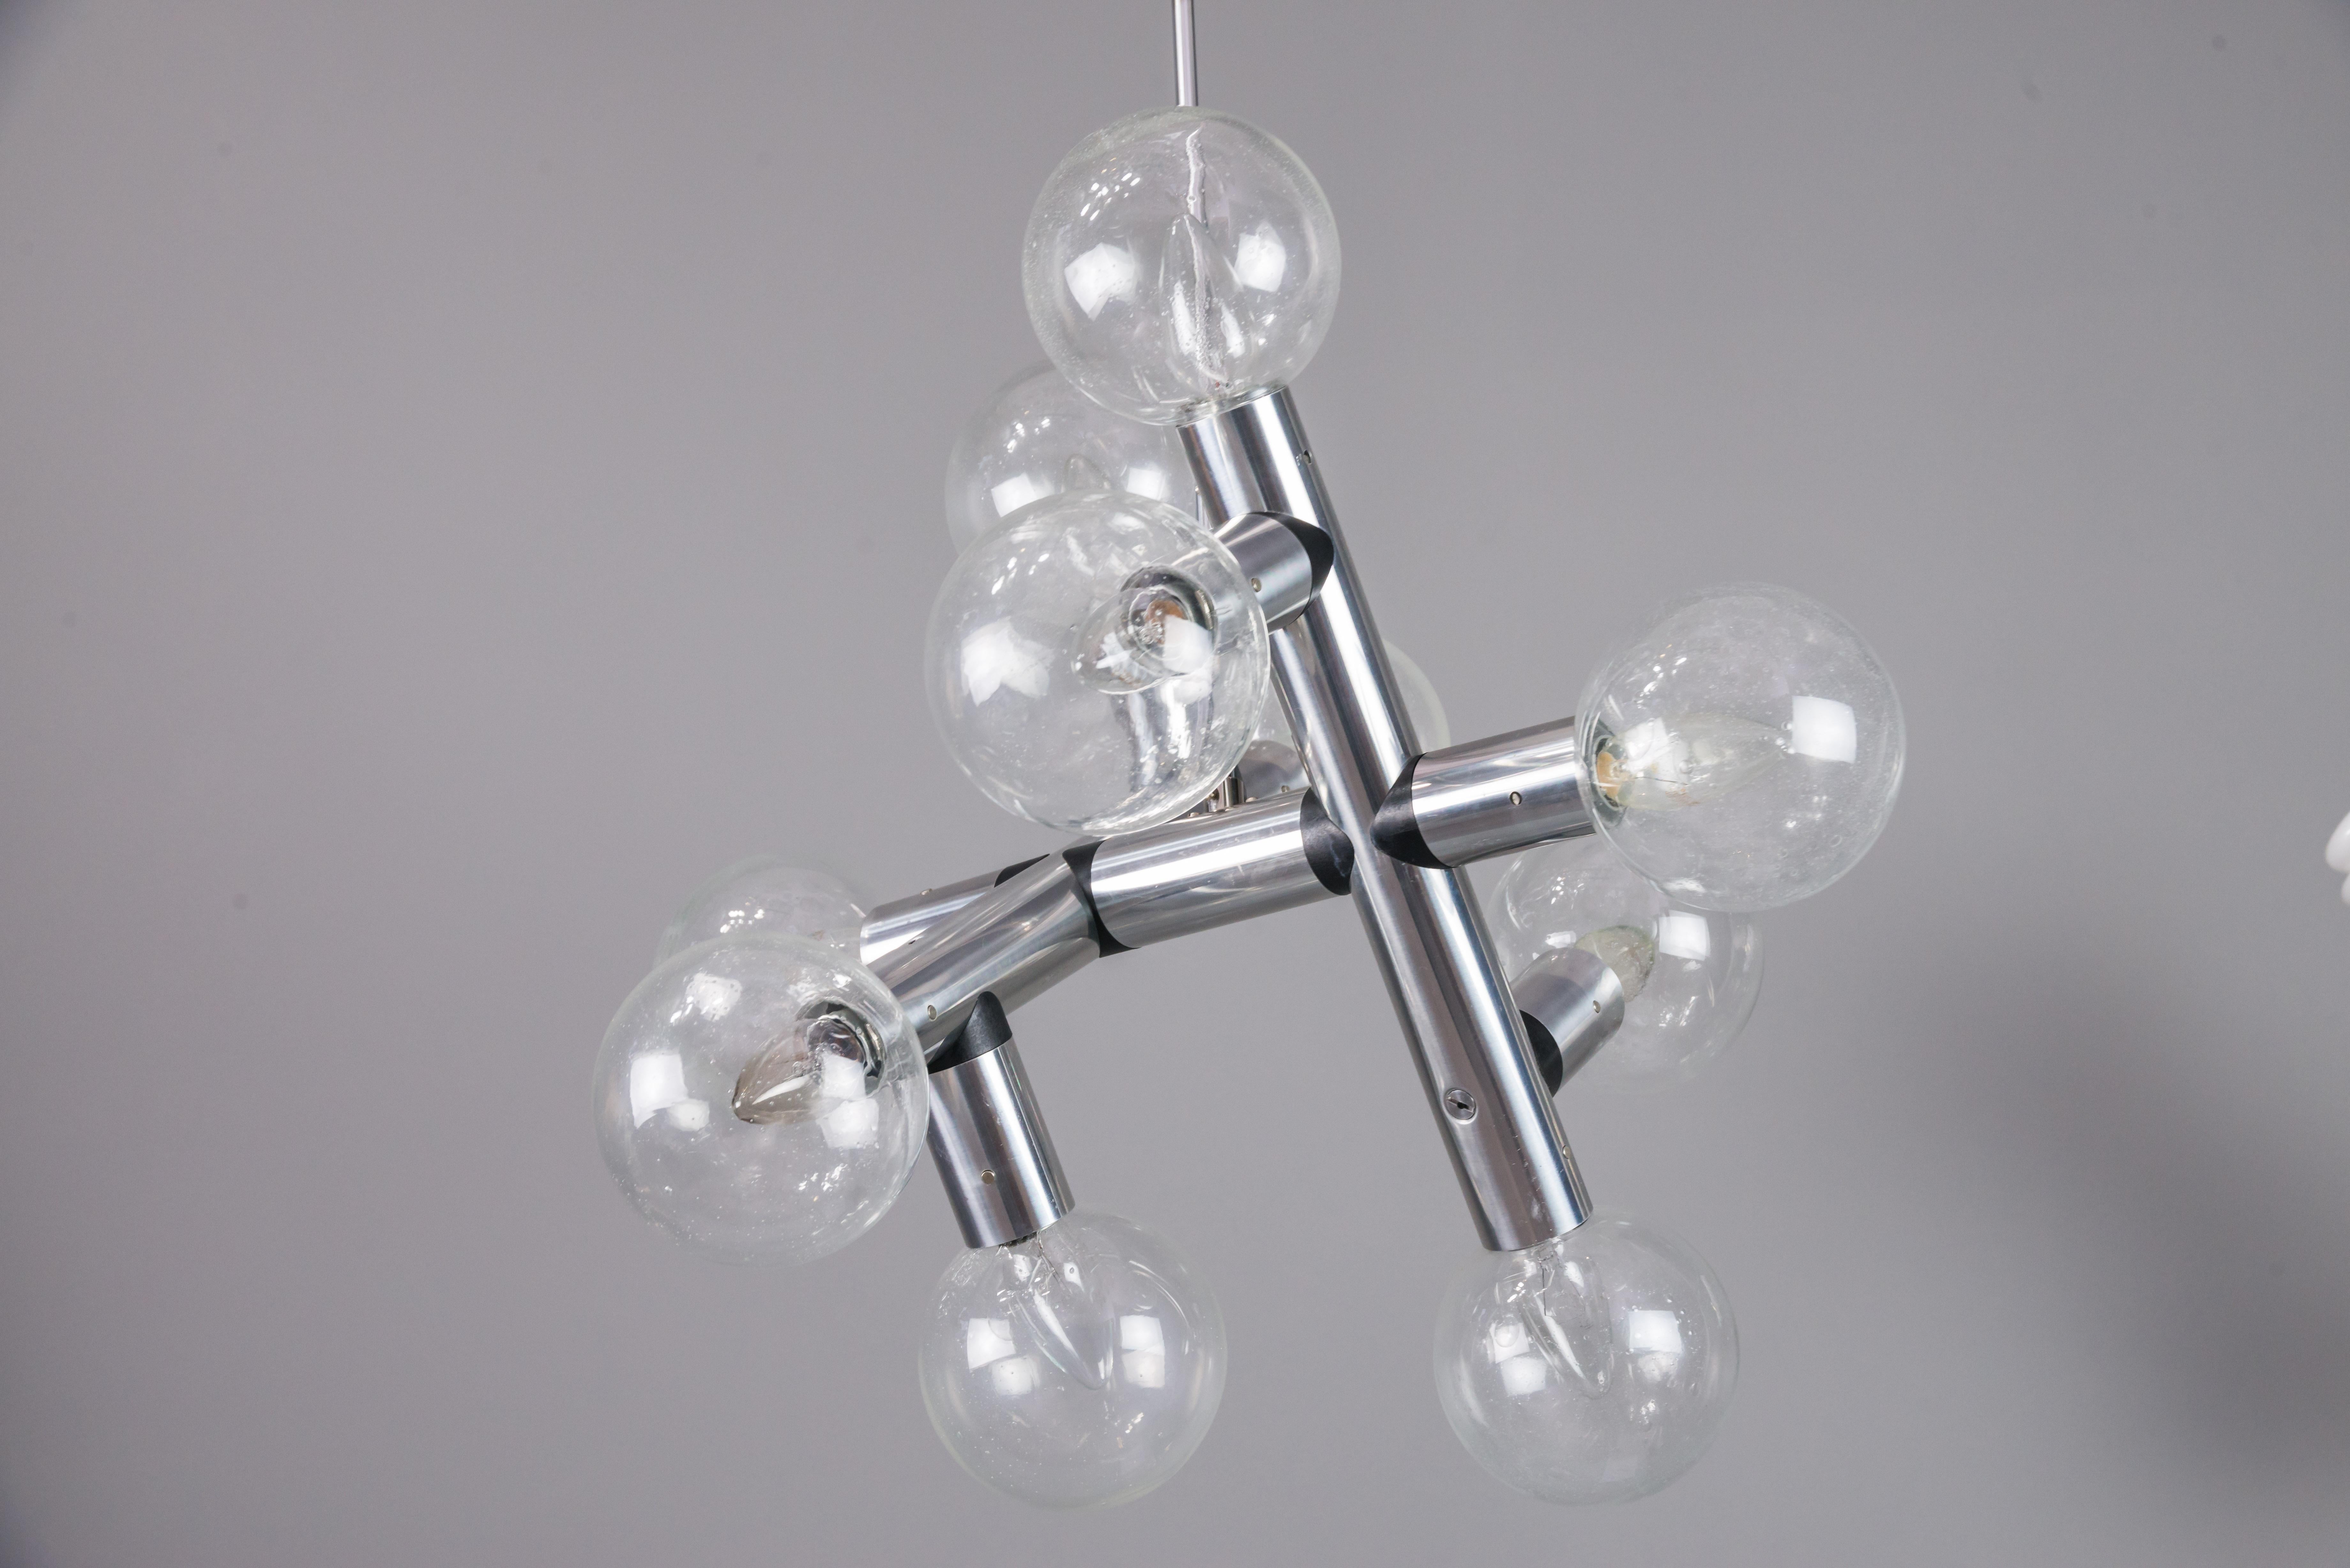 Glass Kalmar Atomic Ceiling Lamps Chandeliers, 1960s For Sale